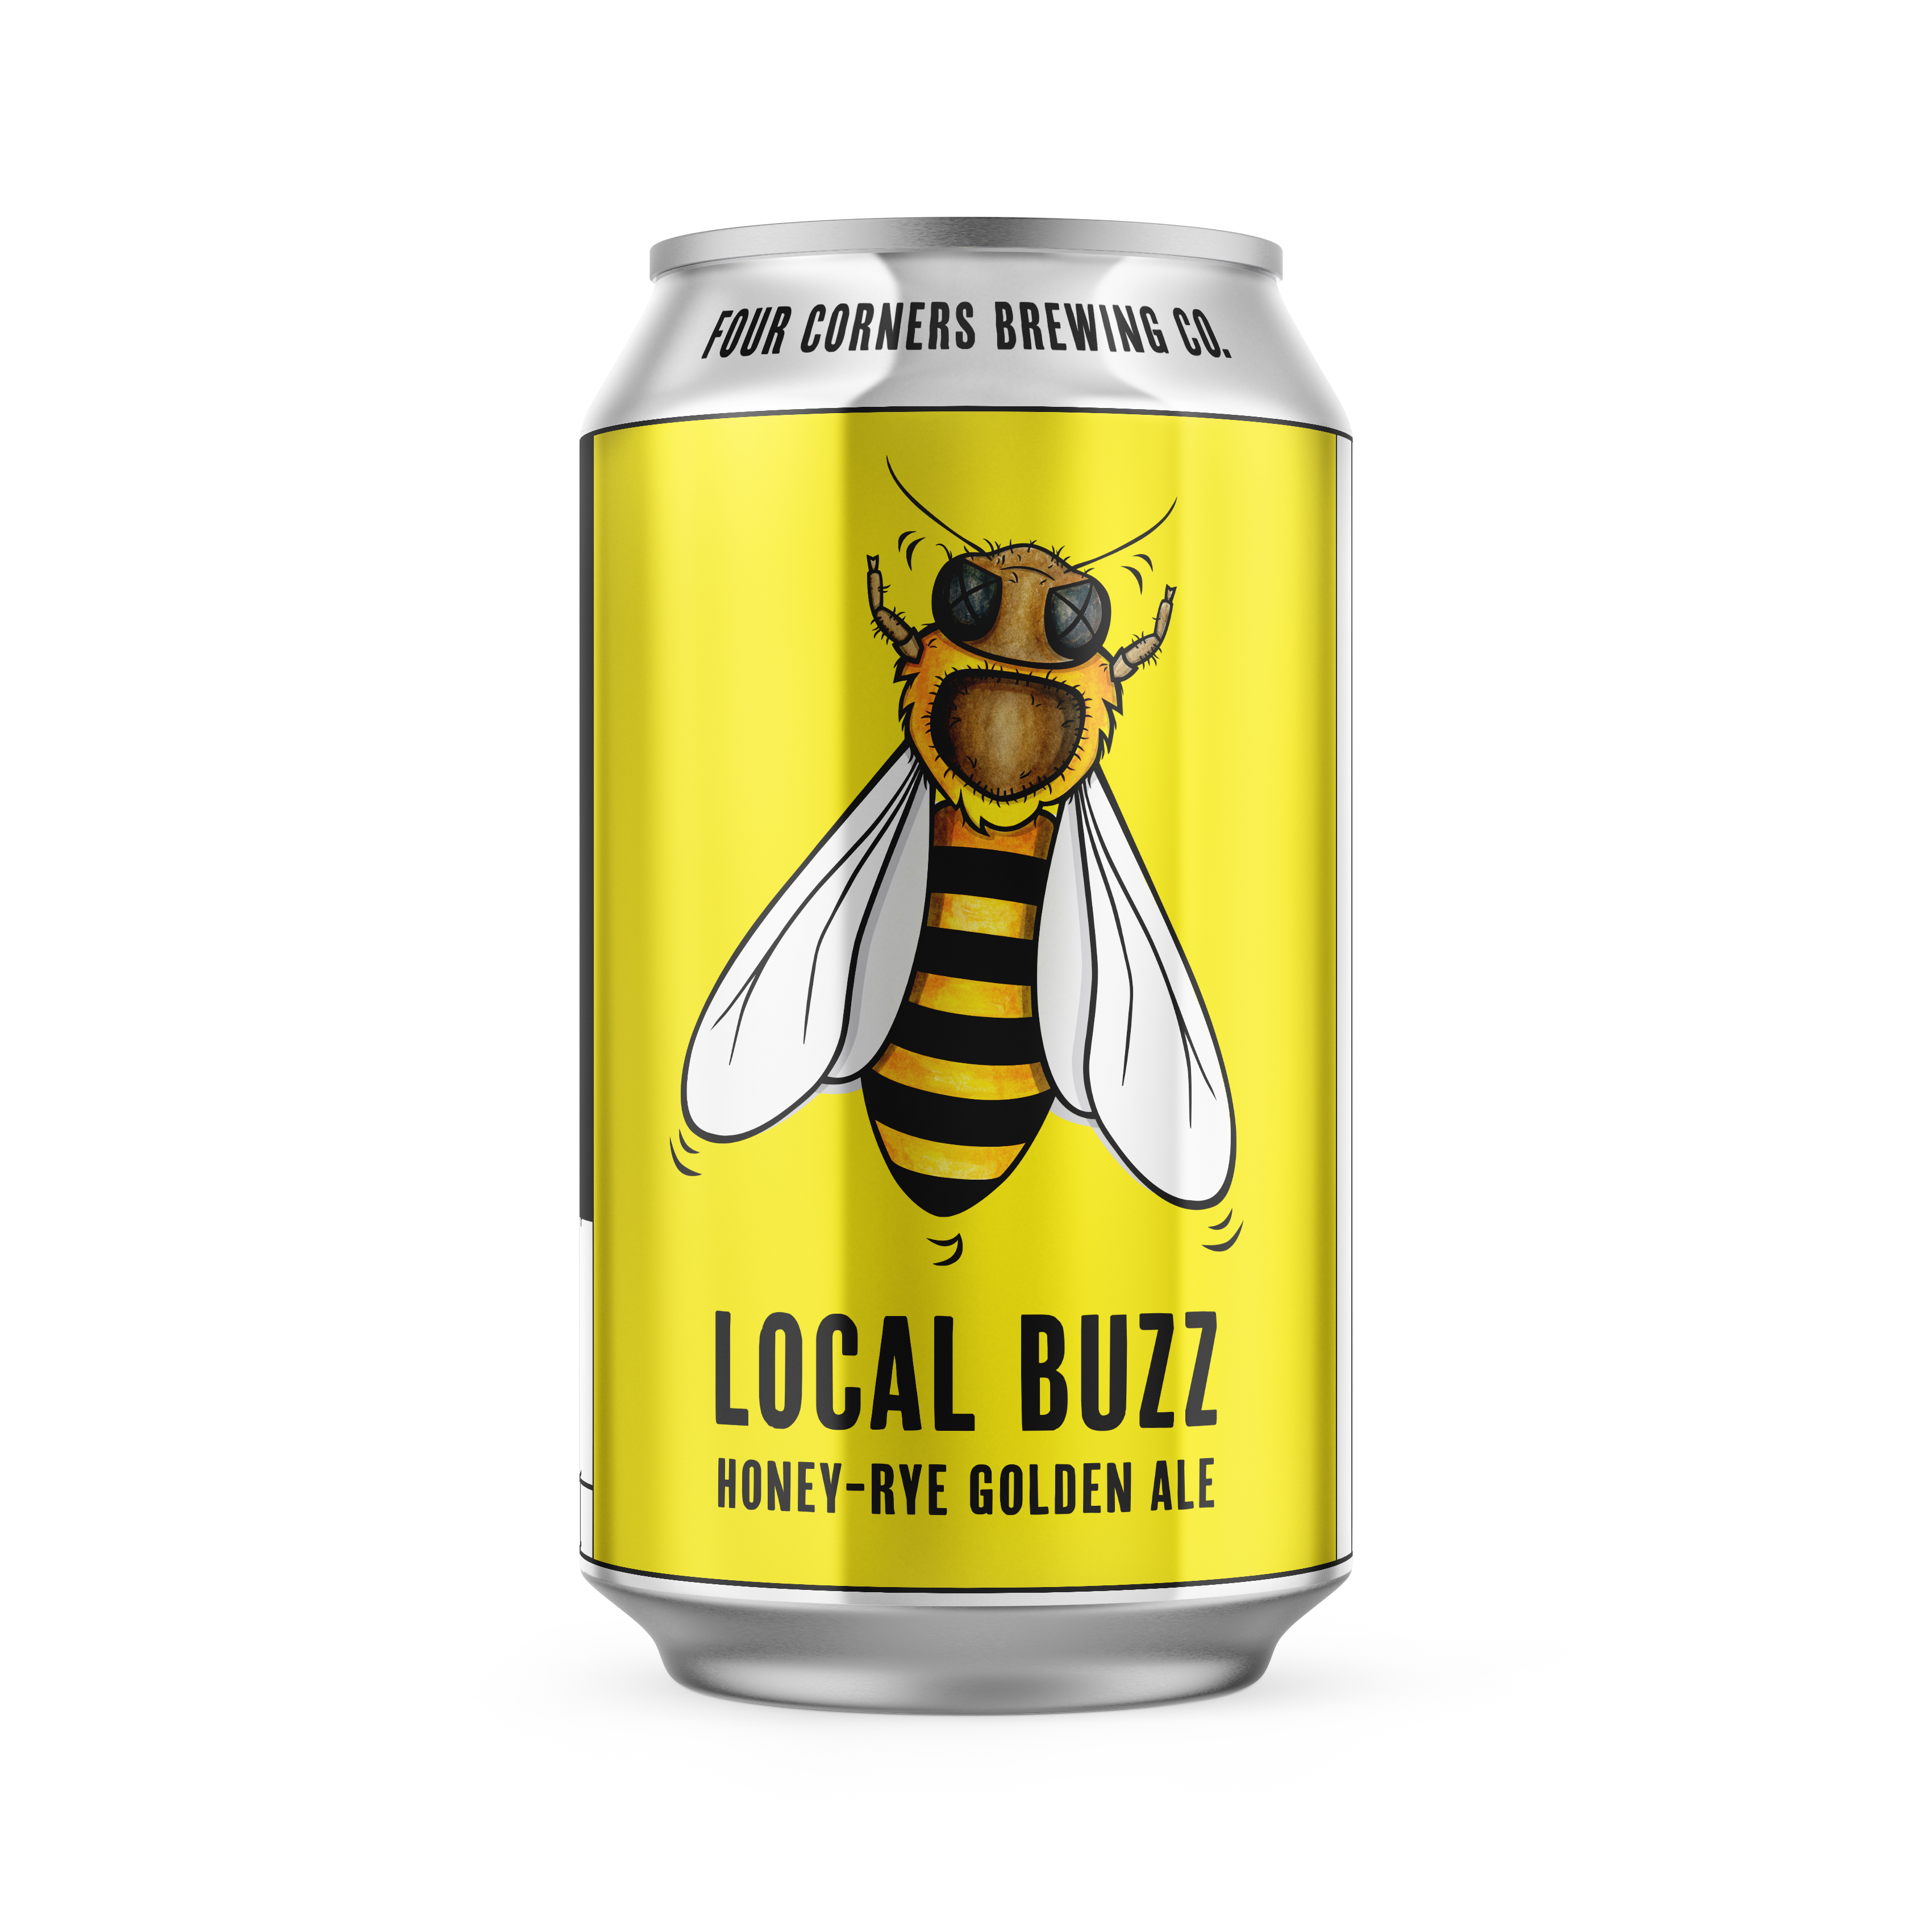 Our flagship brew is a crisp and delicious golden ale. A touch of honey gives the brew a sweet, floral aroma. A hint of rye malt delivers a clean and zesty finish. Refreshing taste is what the buzz is all about.